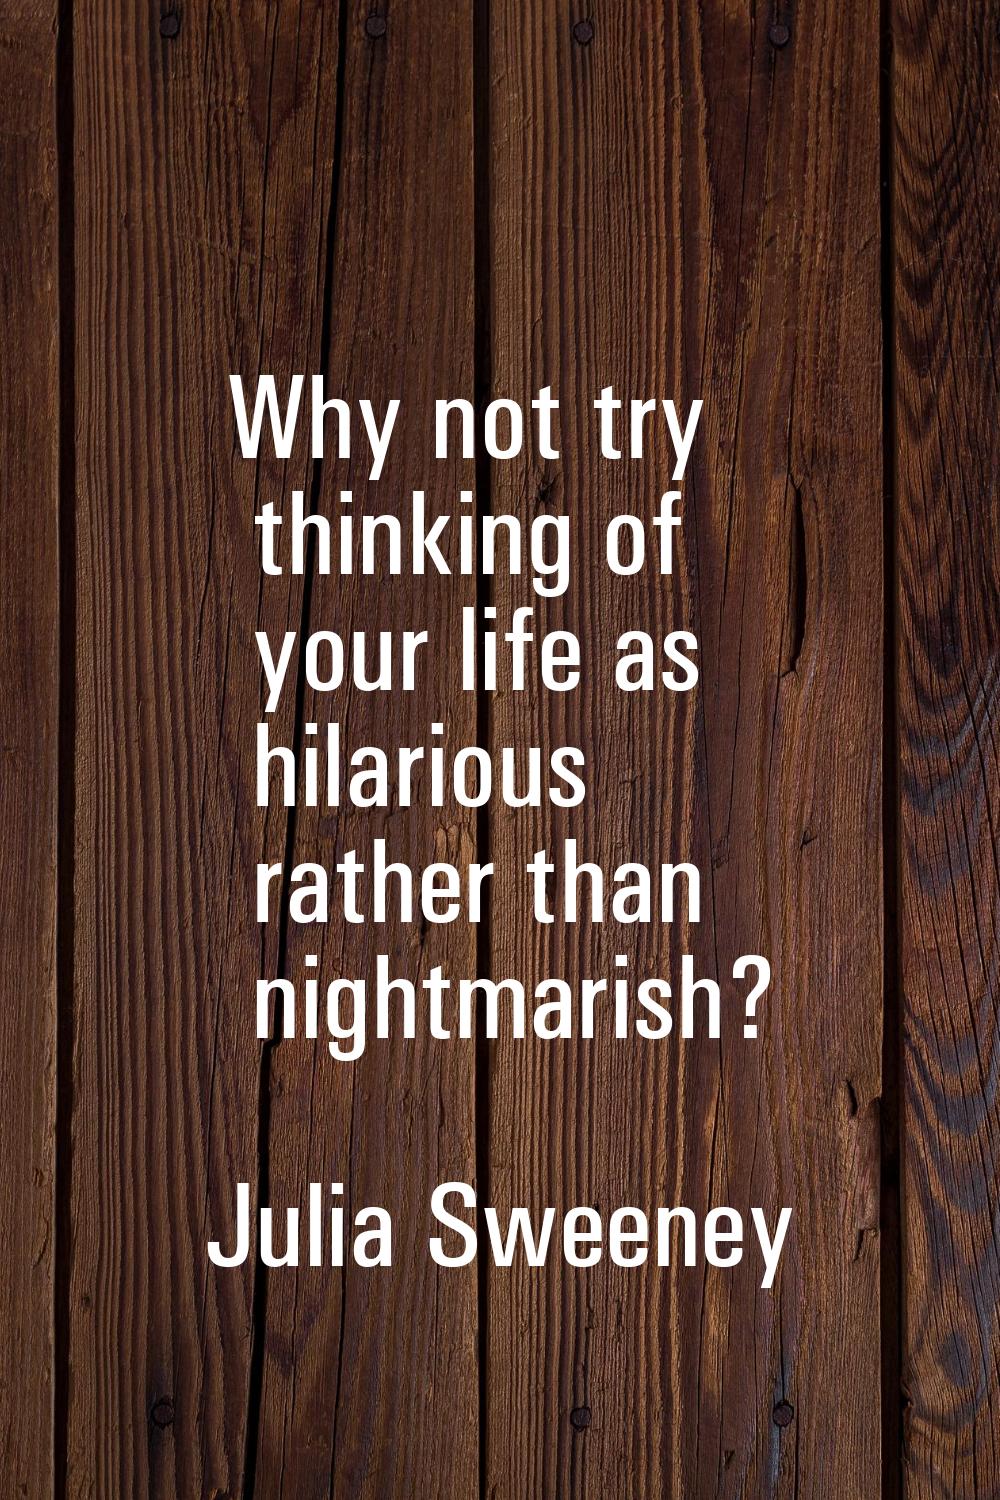 Why not try thinking of your life as hilarious rather than nightmarish?